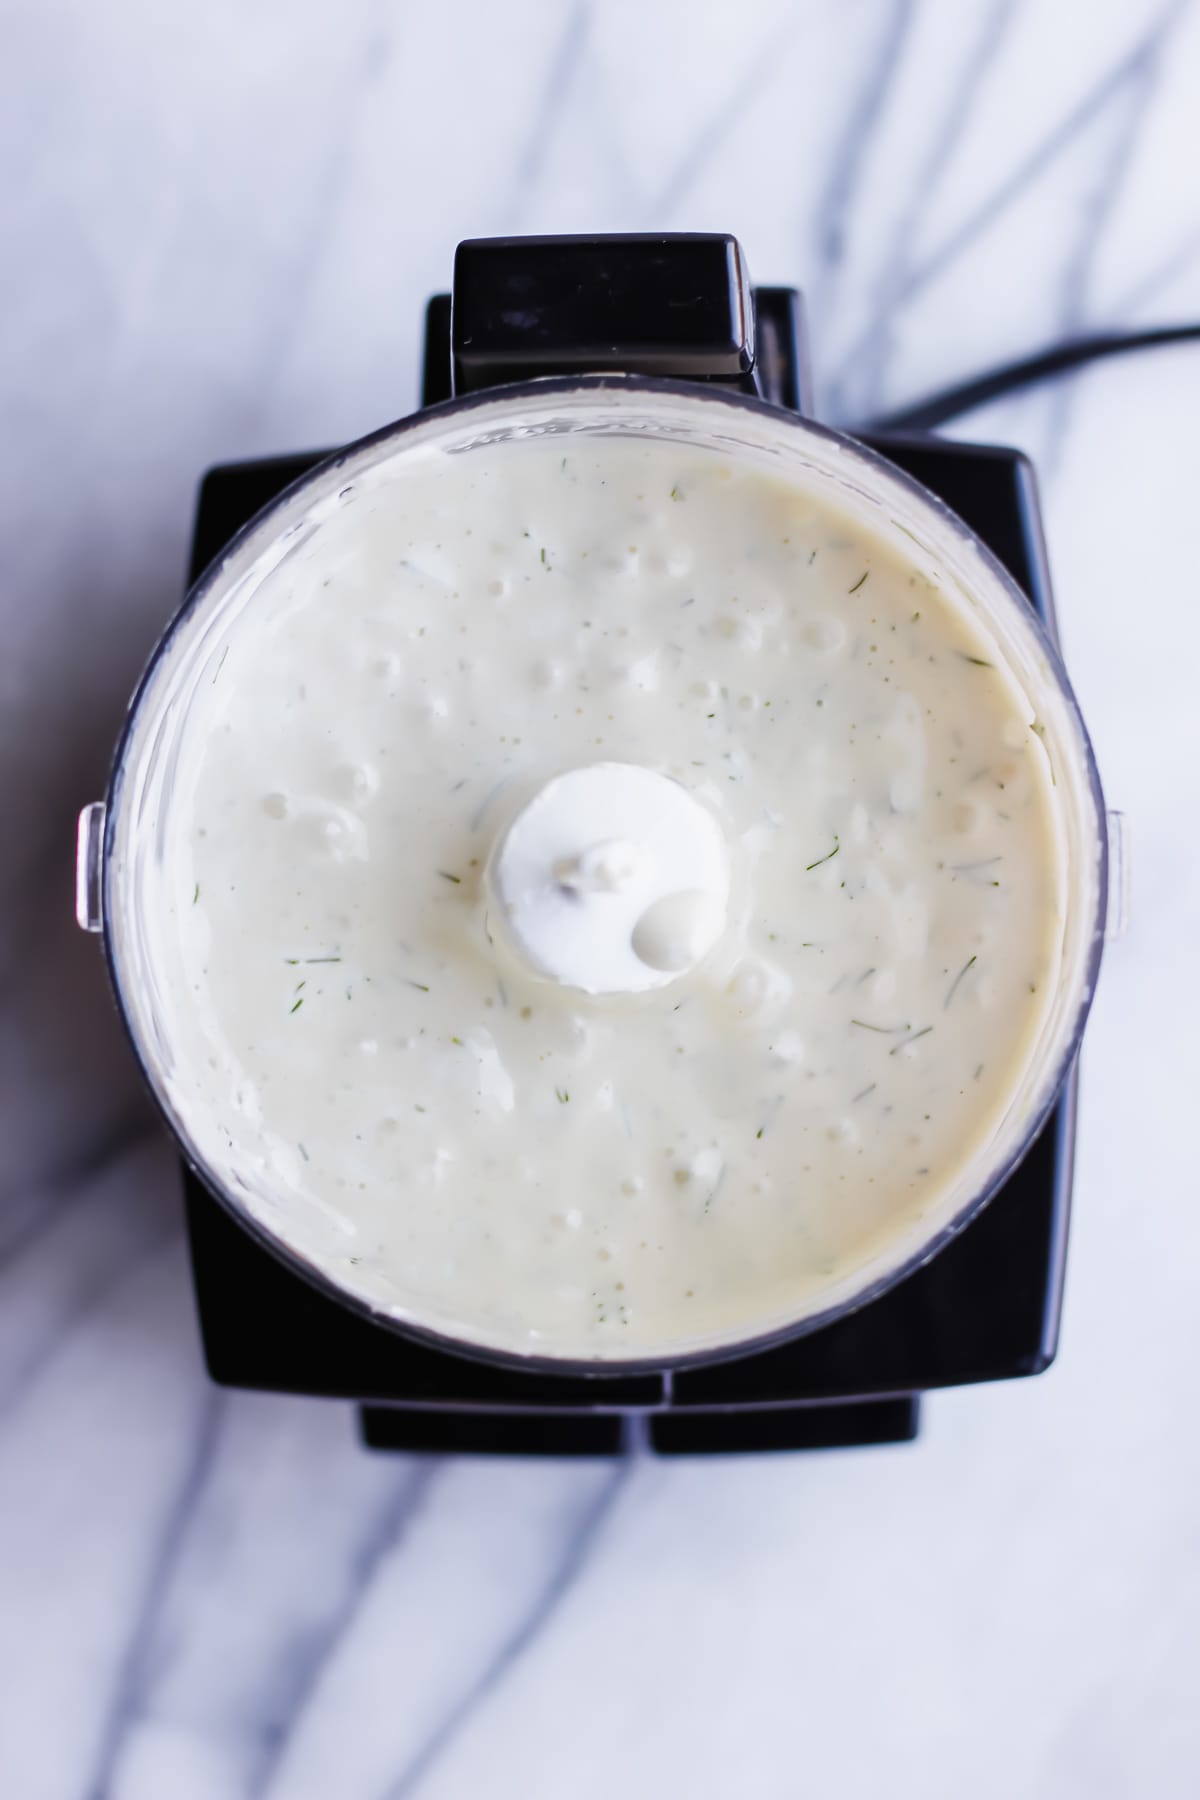 Blended whole30 tartar sauce ingredients in a food processor. 